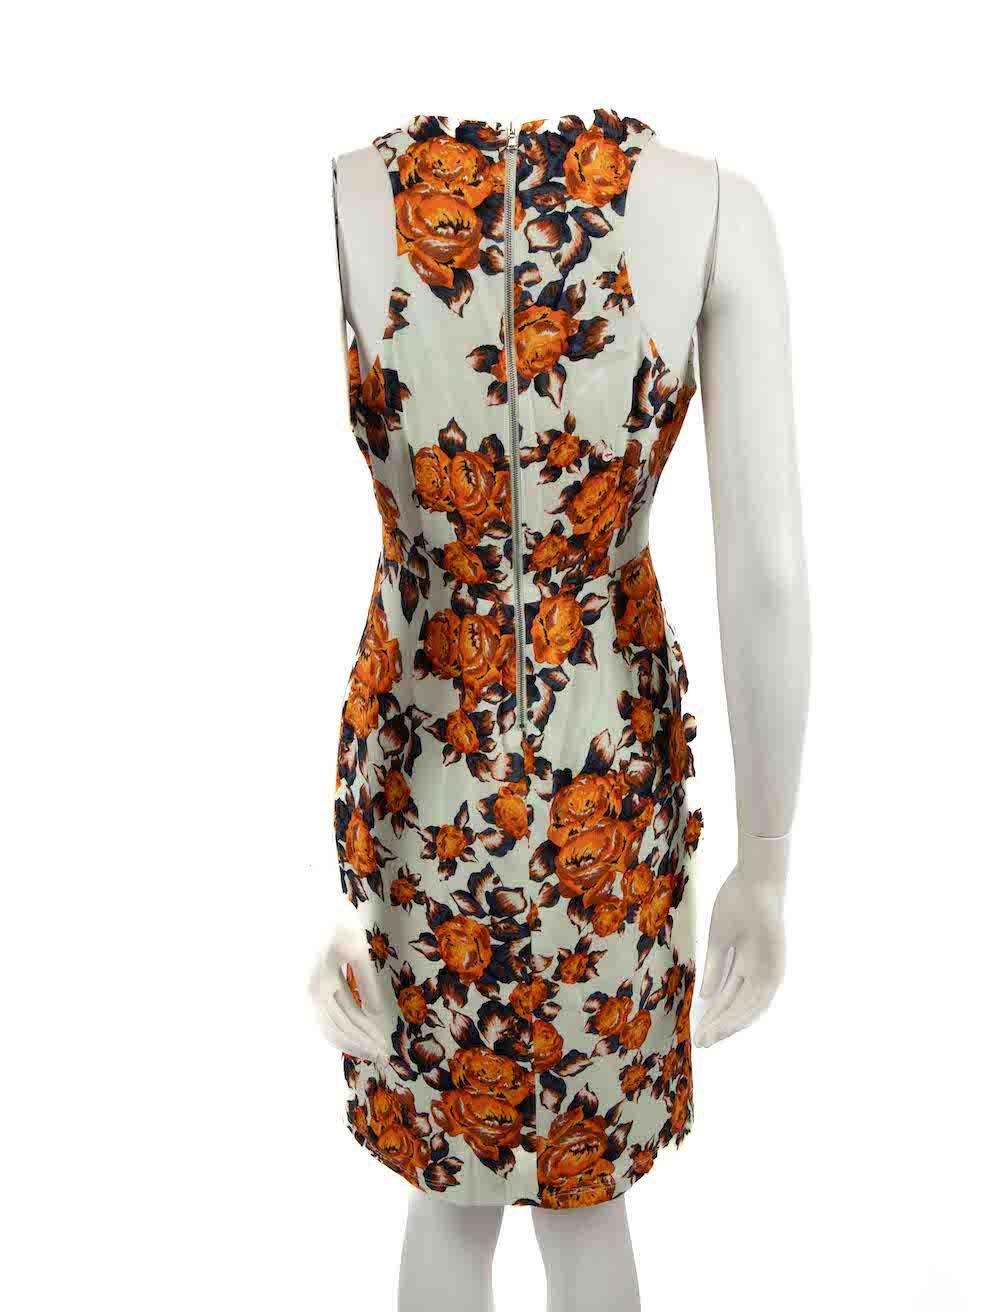 Suno Orange Silk Floral Cut-Out Mini Dress Size S In Good Condition For Sale In London, GB